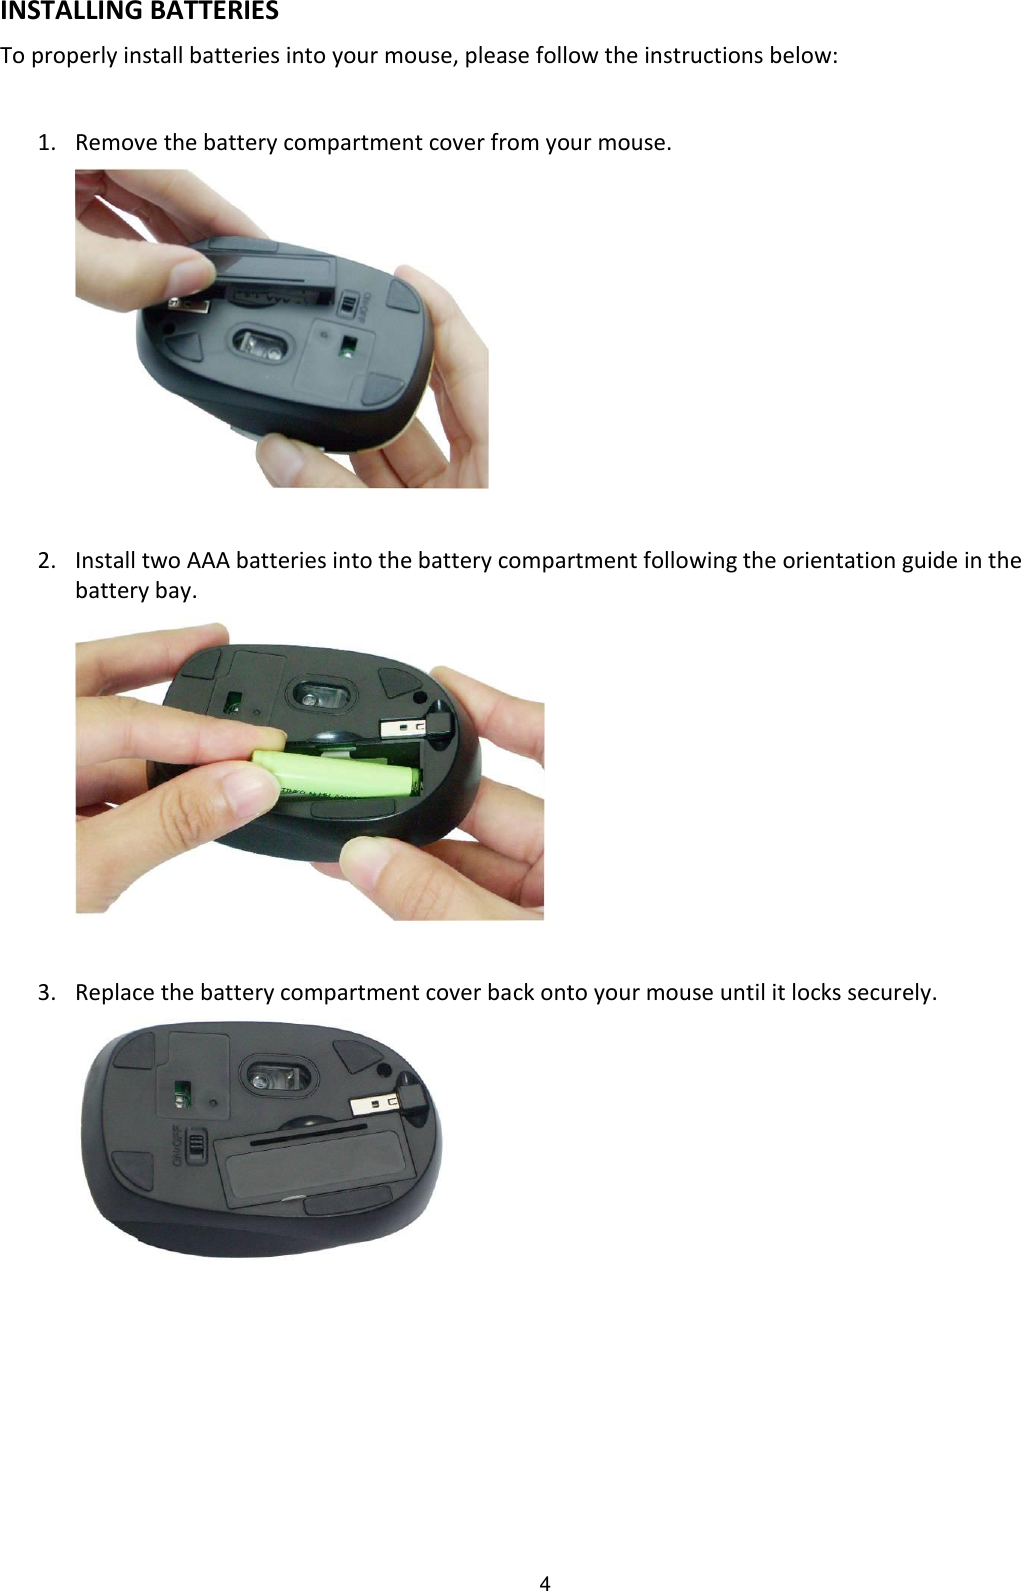 4 INSTALLING BATTERIES To properly install batteries into your mouse, please follow the instructions below:  1. Remove the battery compartment cover from your mouse.        2. Install two AAA batteries into the battery compartment following the orientation guide in the battery bay.       3. Replace the battery compartment cover back onto your mouse until it locks securely.        